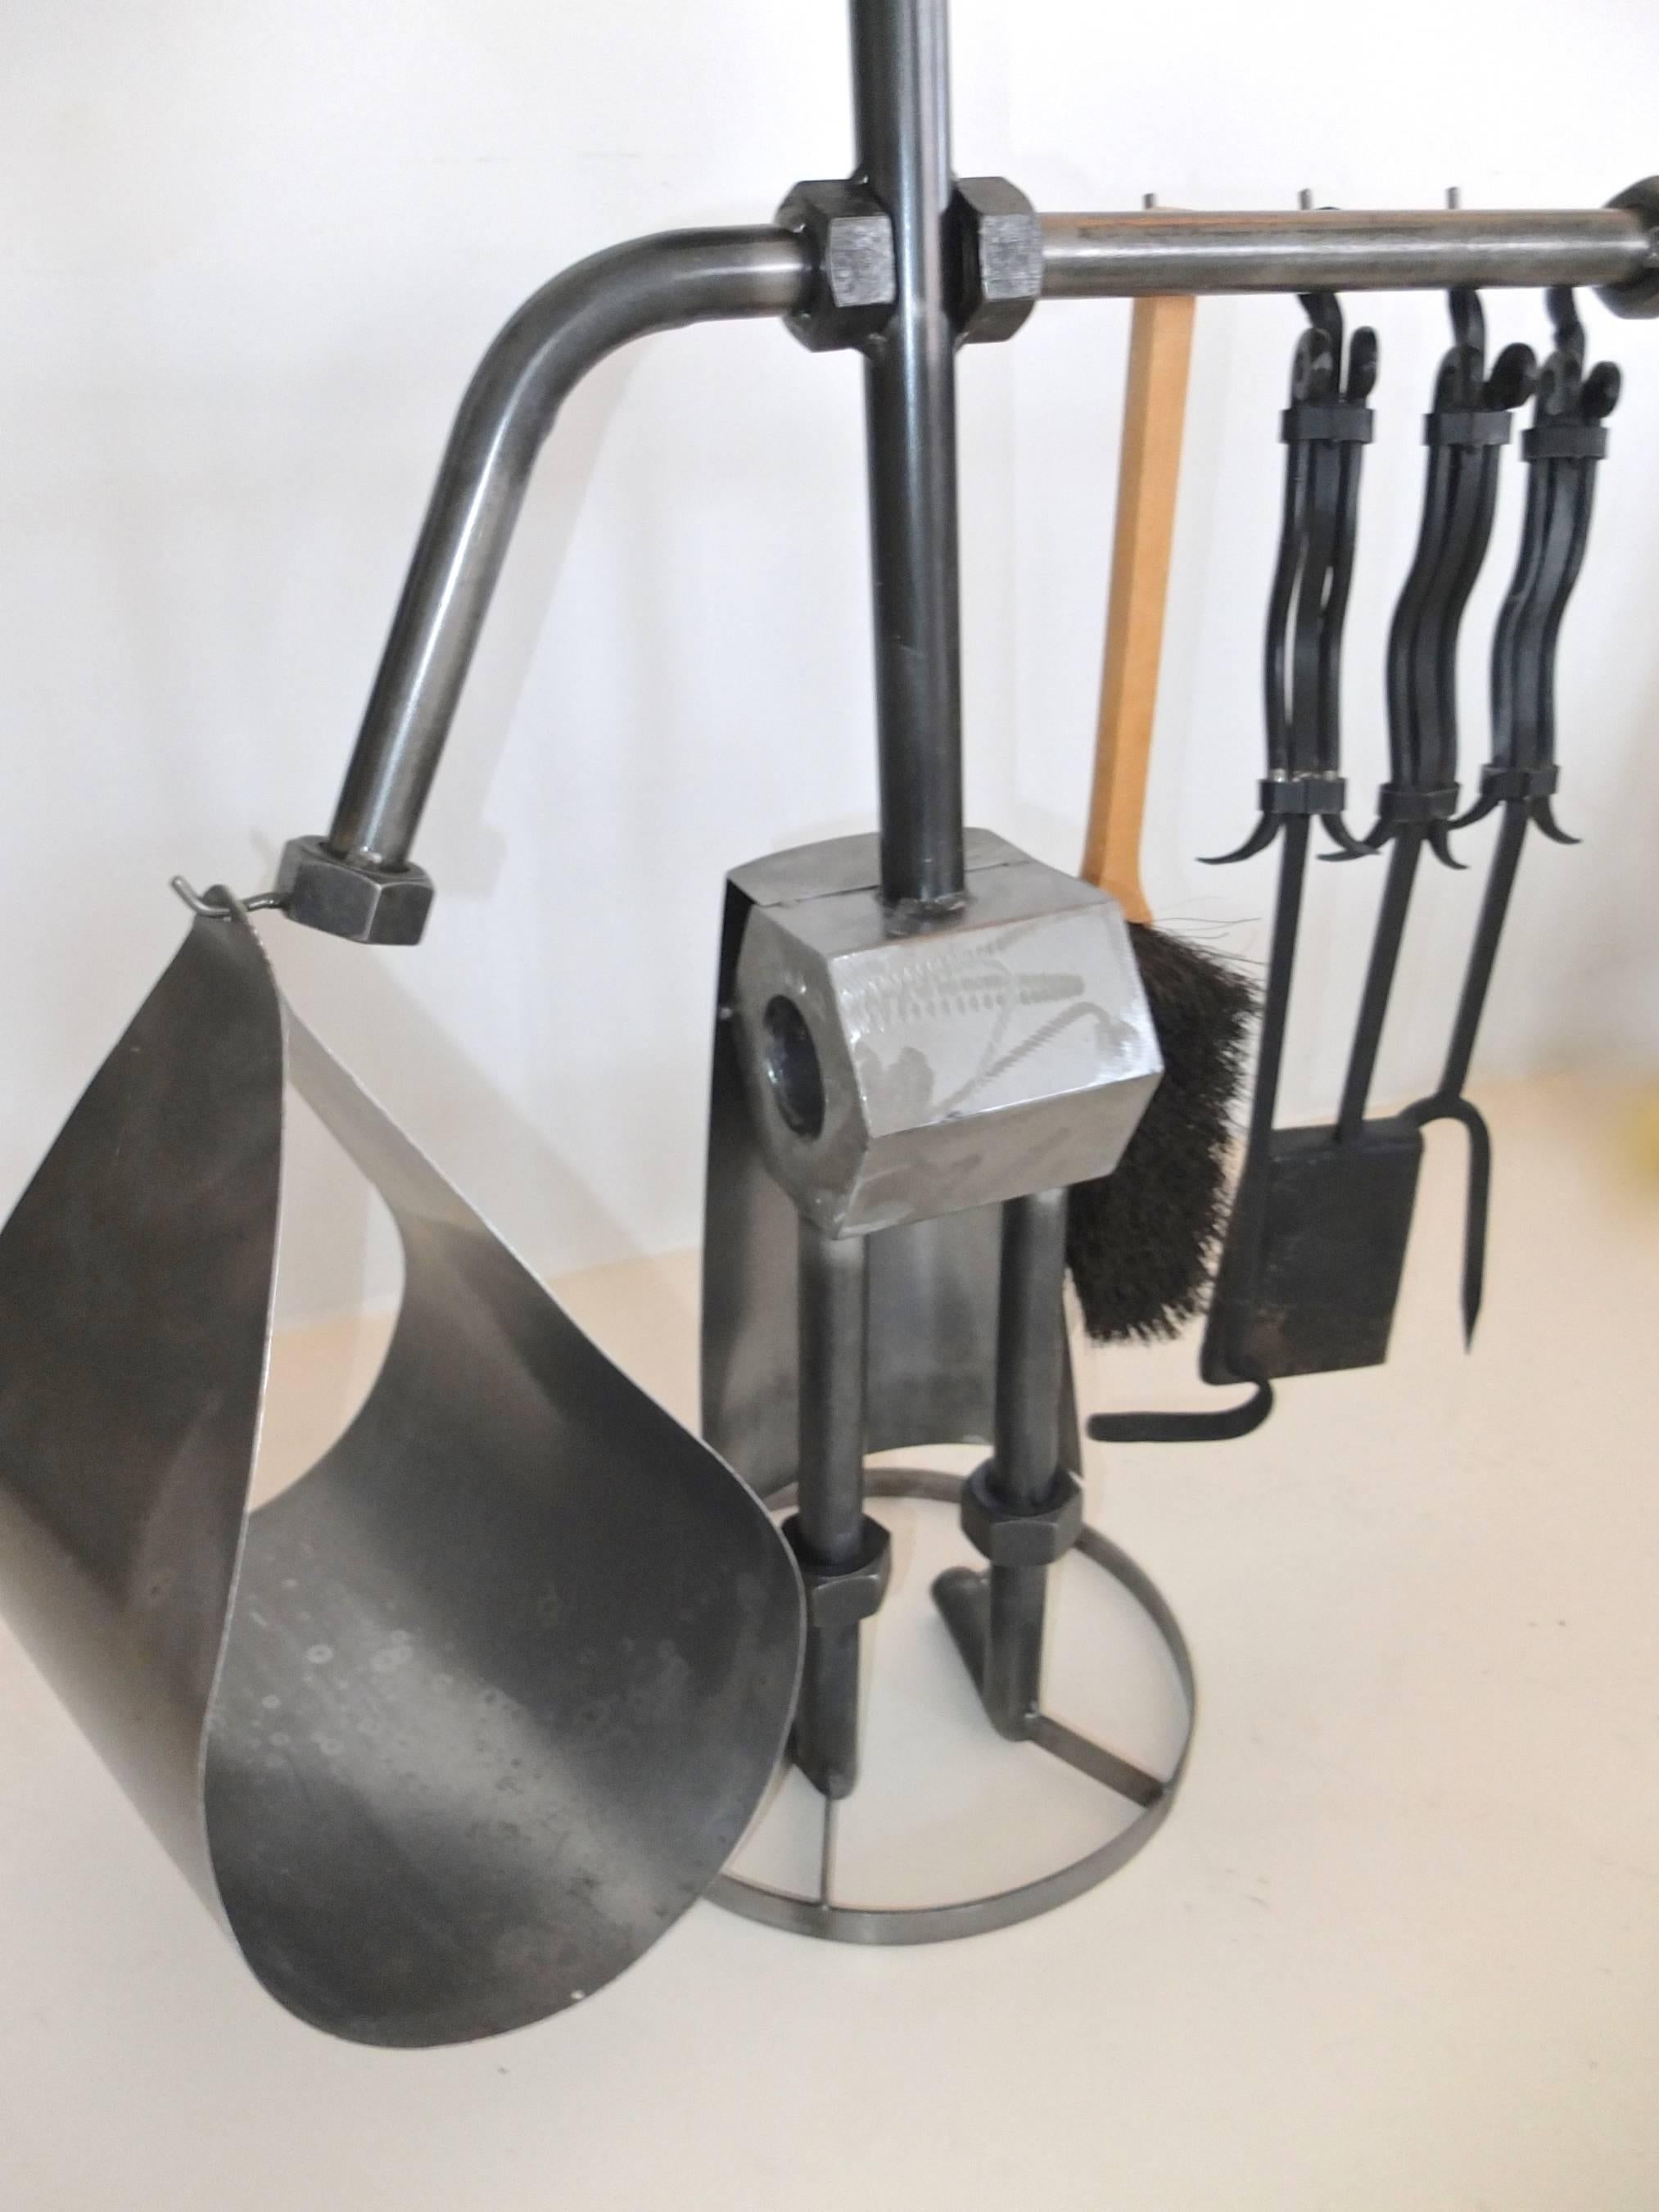 Hinz & Kunst Fireplace Tools Sculpture by Günter Scholz In Excellent Condition For Sale In Hanover, MA